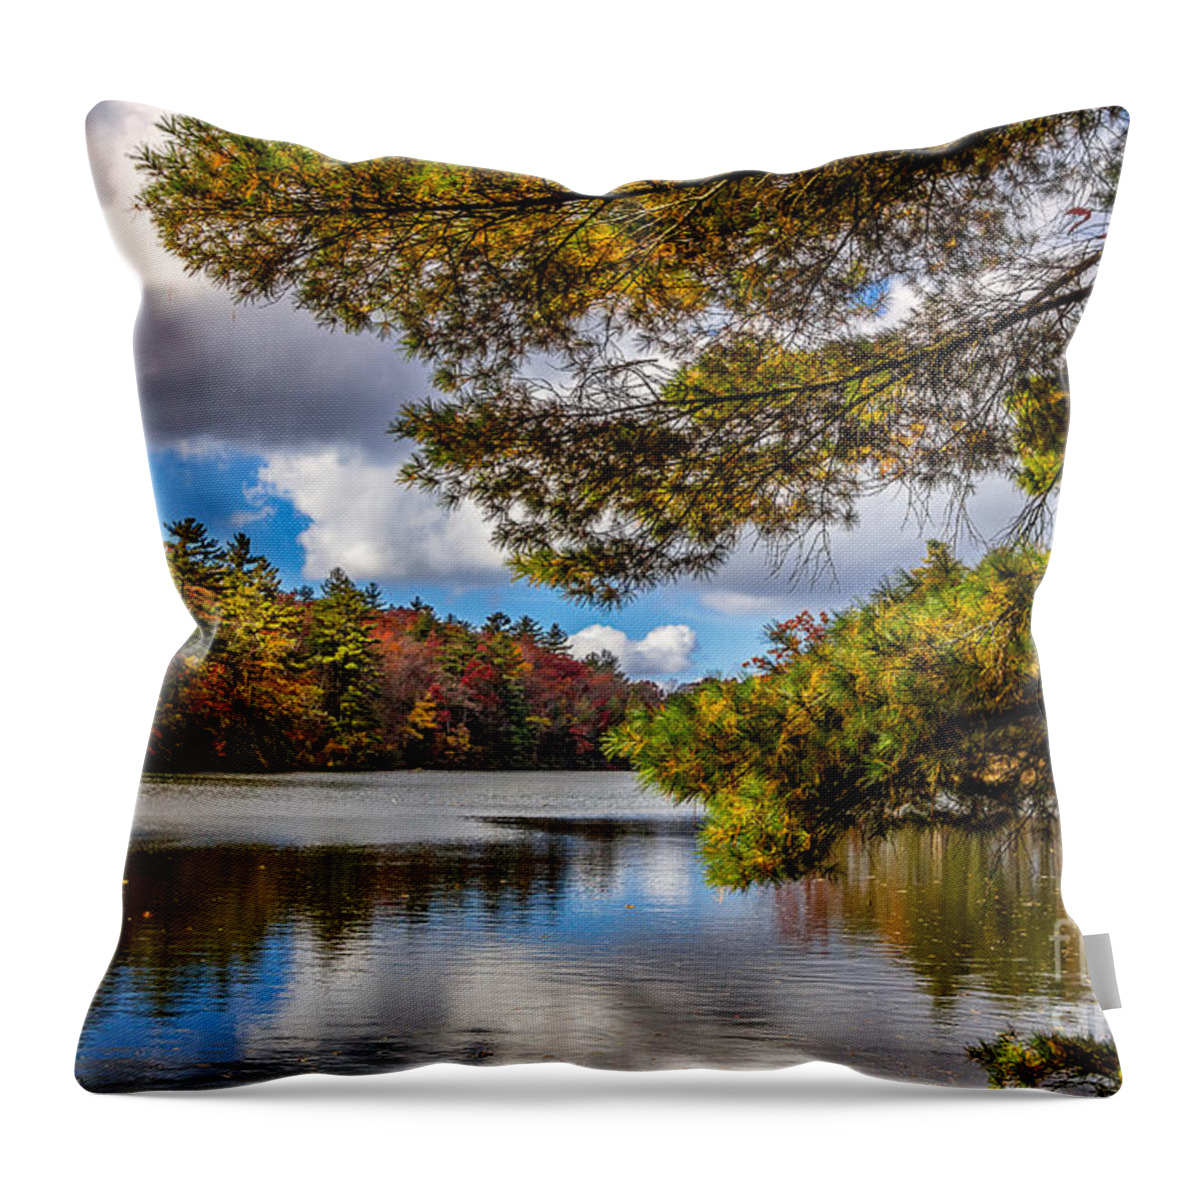 Fort-mountain Throw Pillow featuring the photograph Fort Mountain State Park by Bernd Laeschke